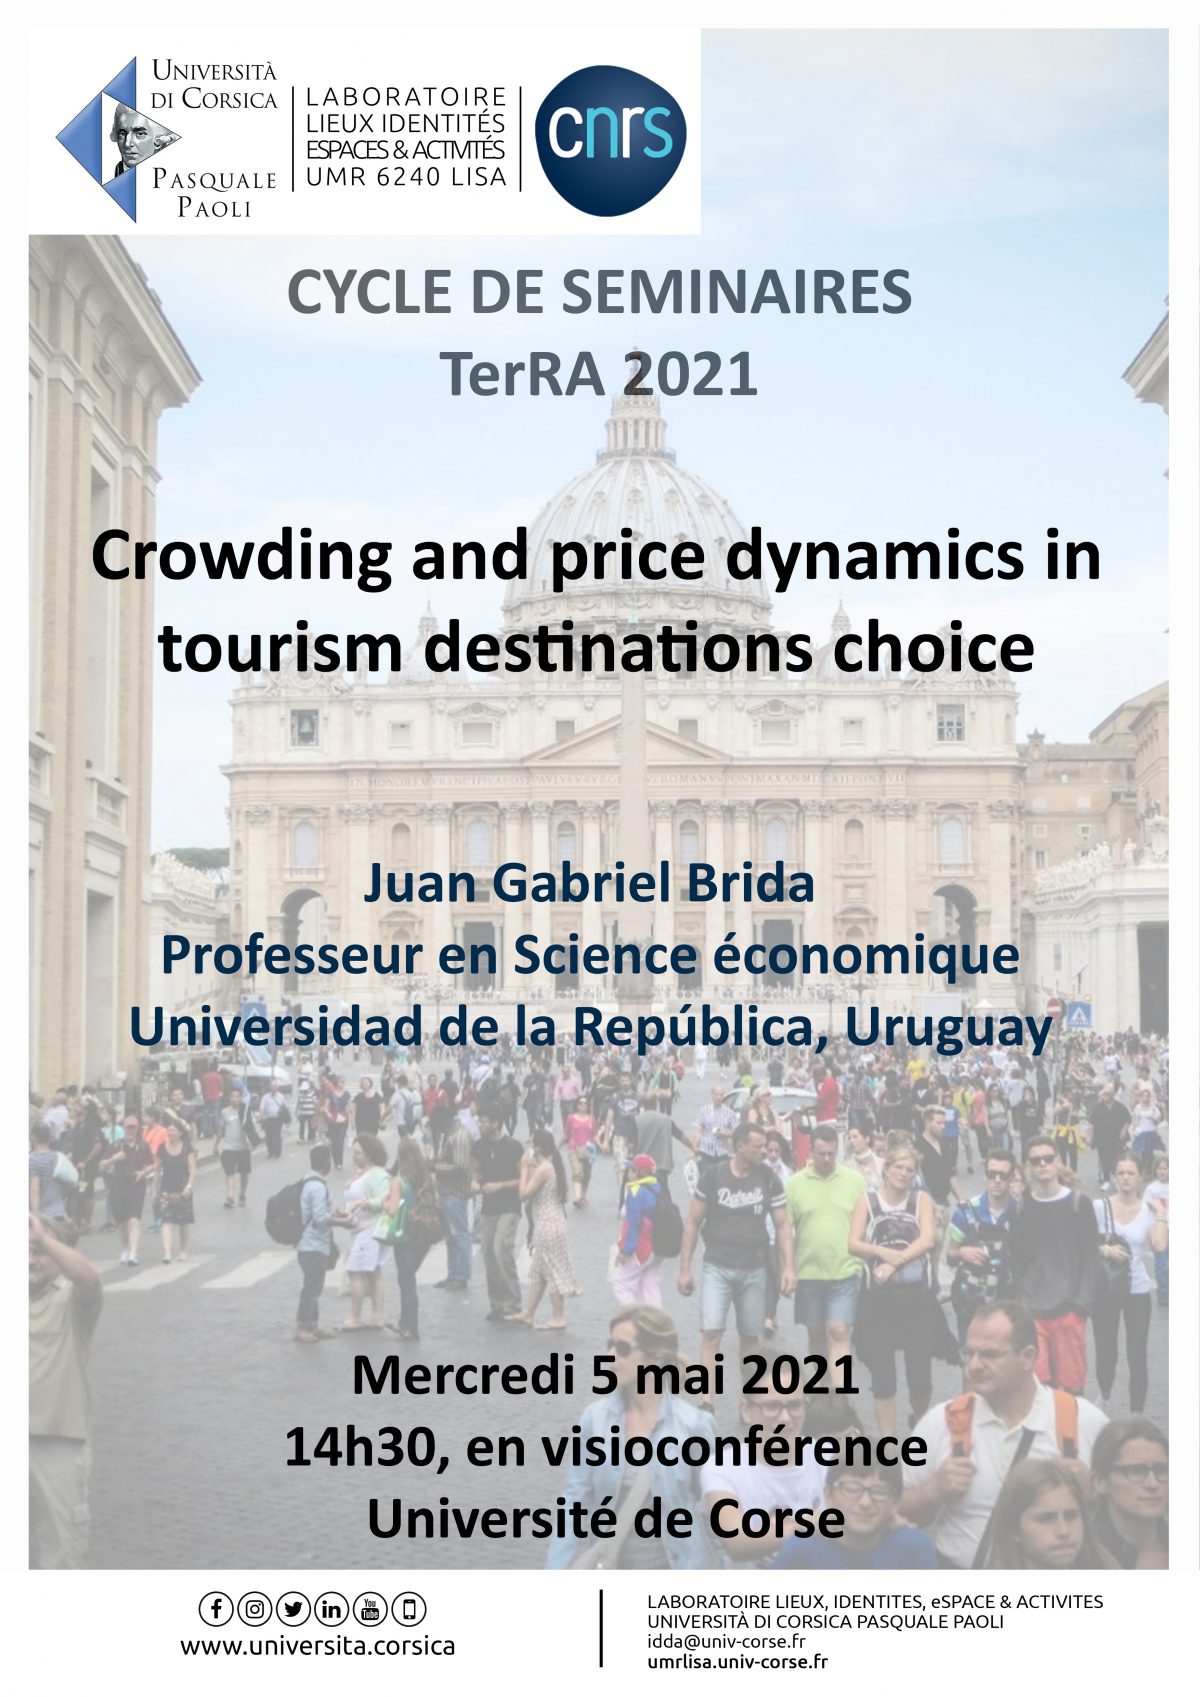 Crowding and price dynamics in tourism destinations choice